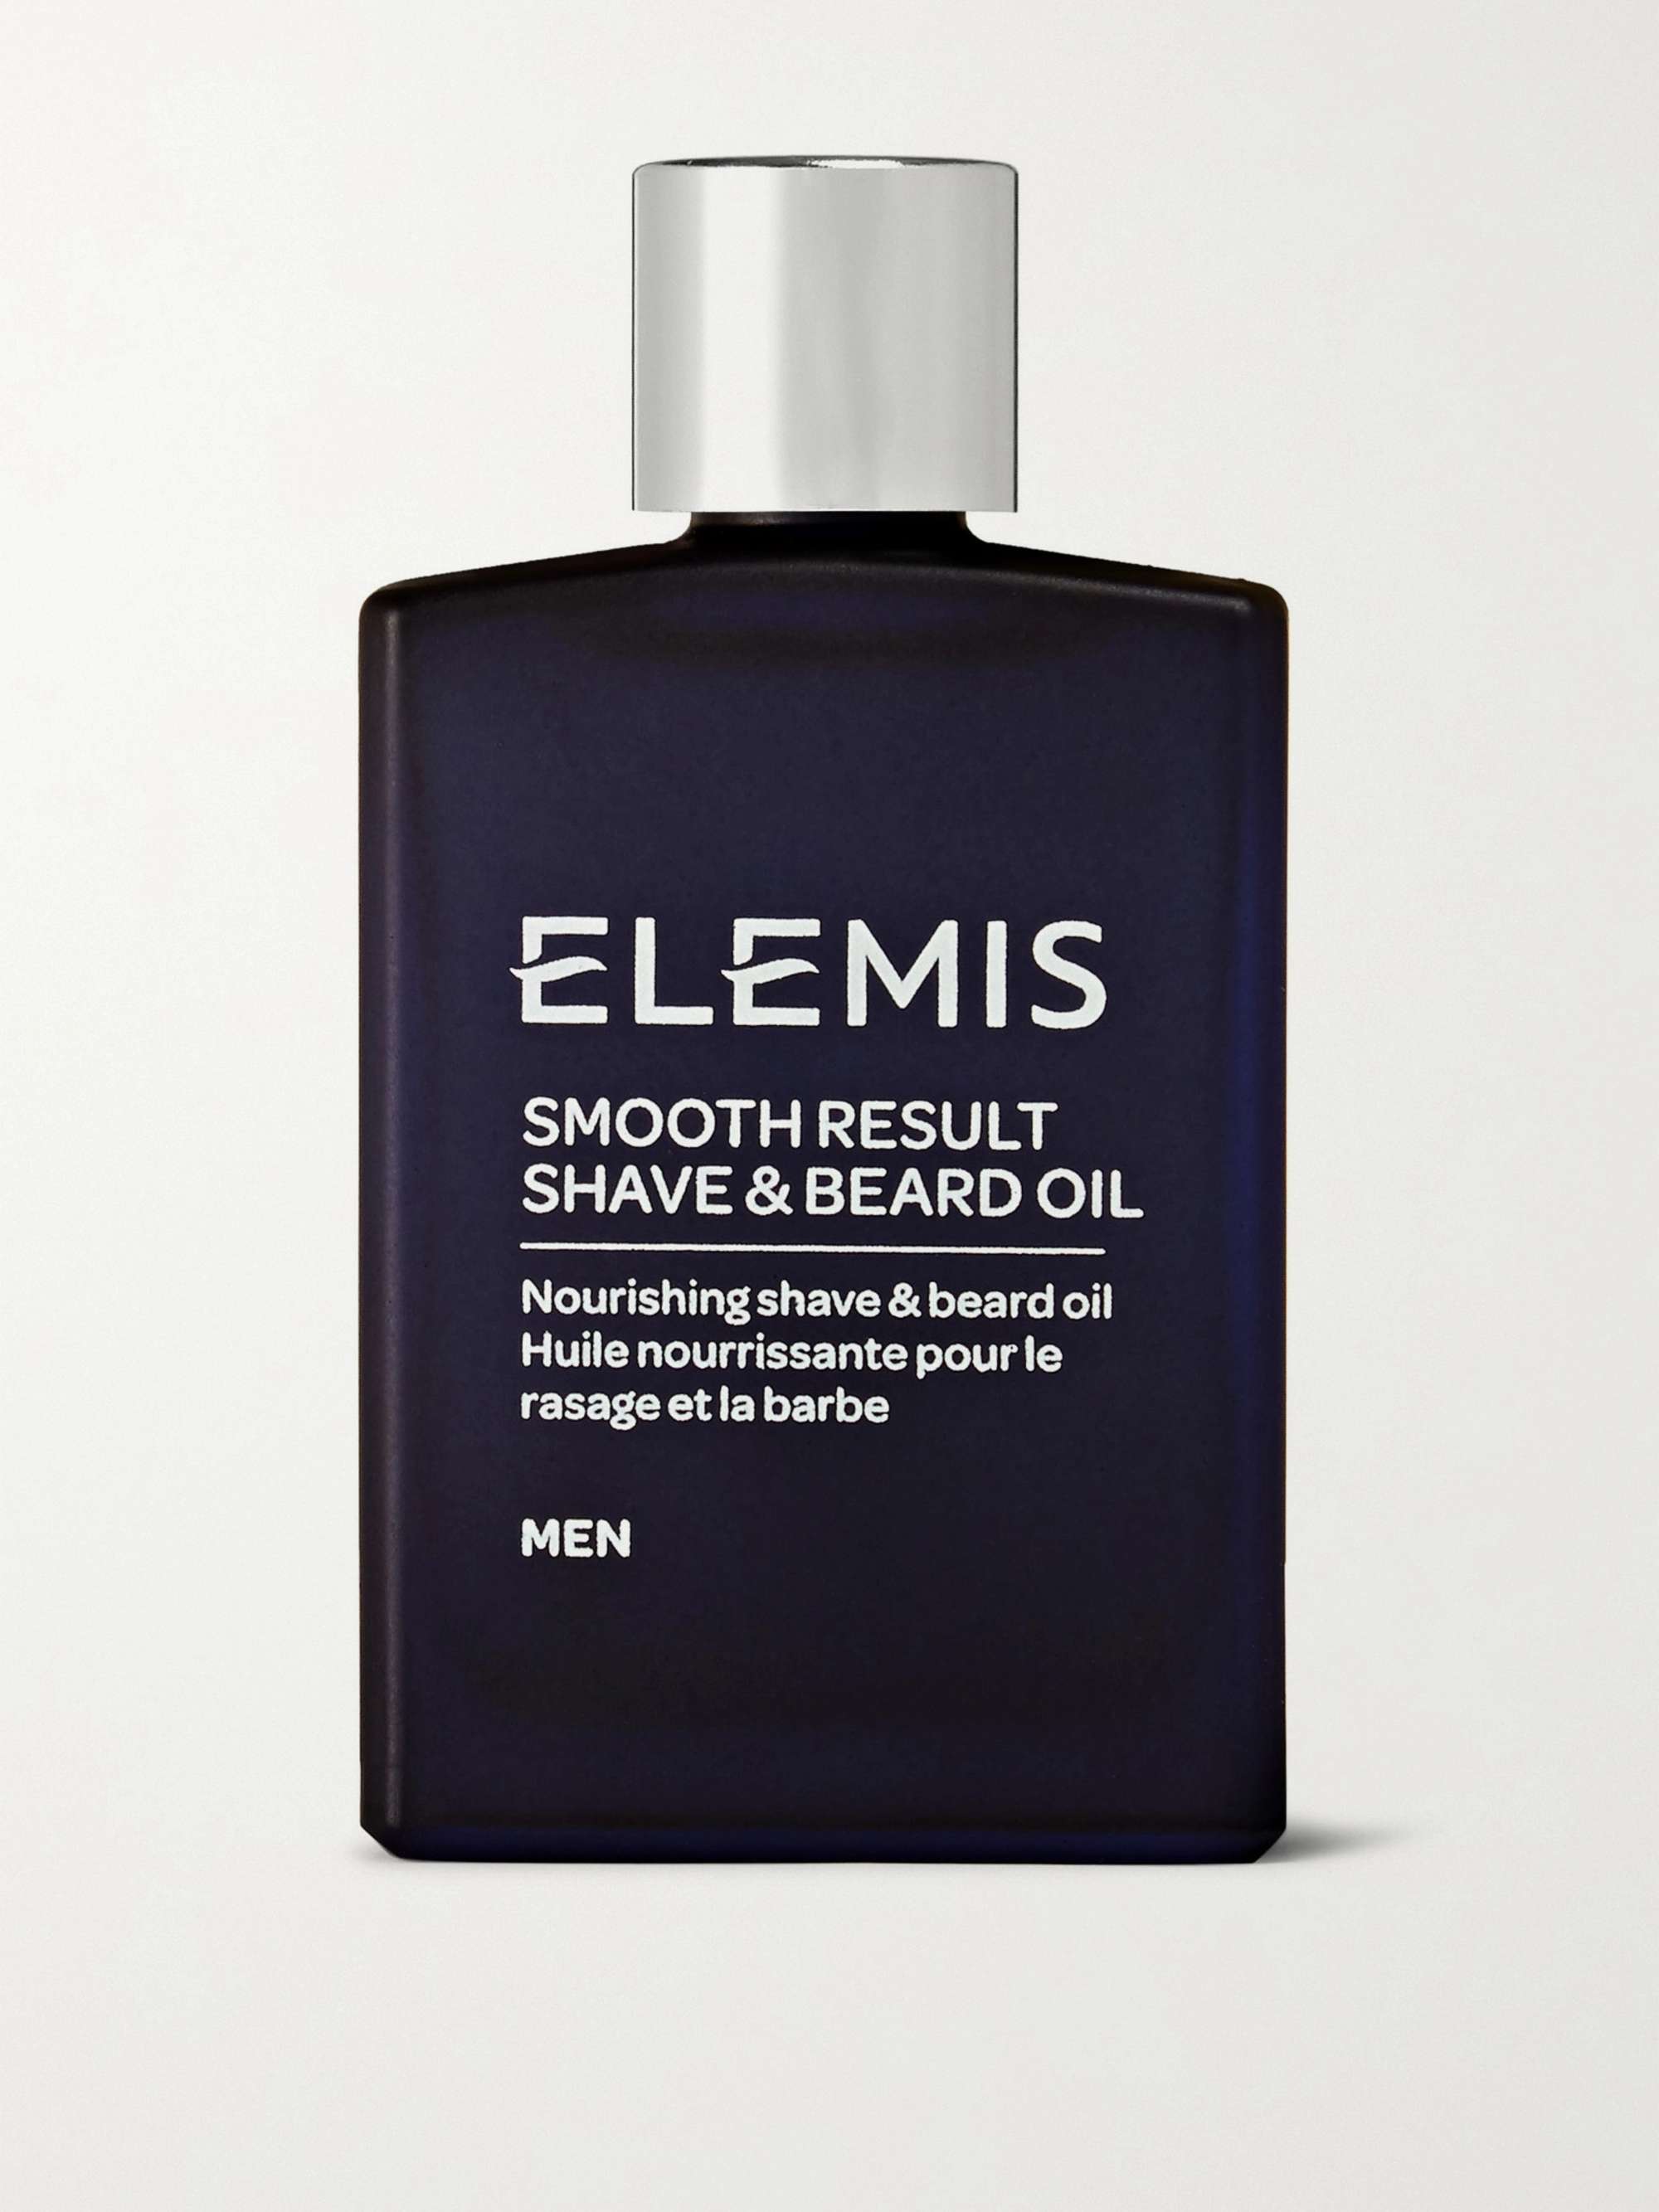 ELEMIS Smooth Result Shave and Beard Oil, 30ml